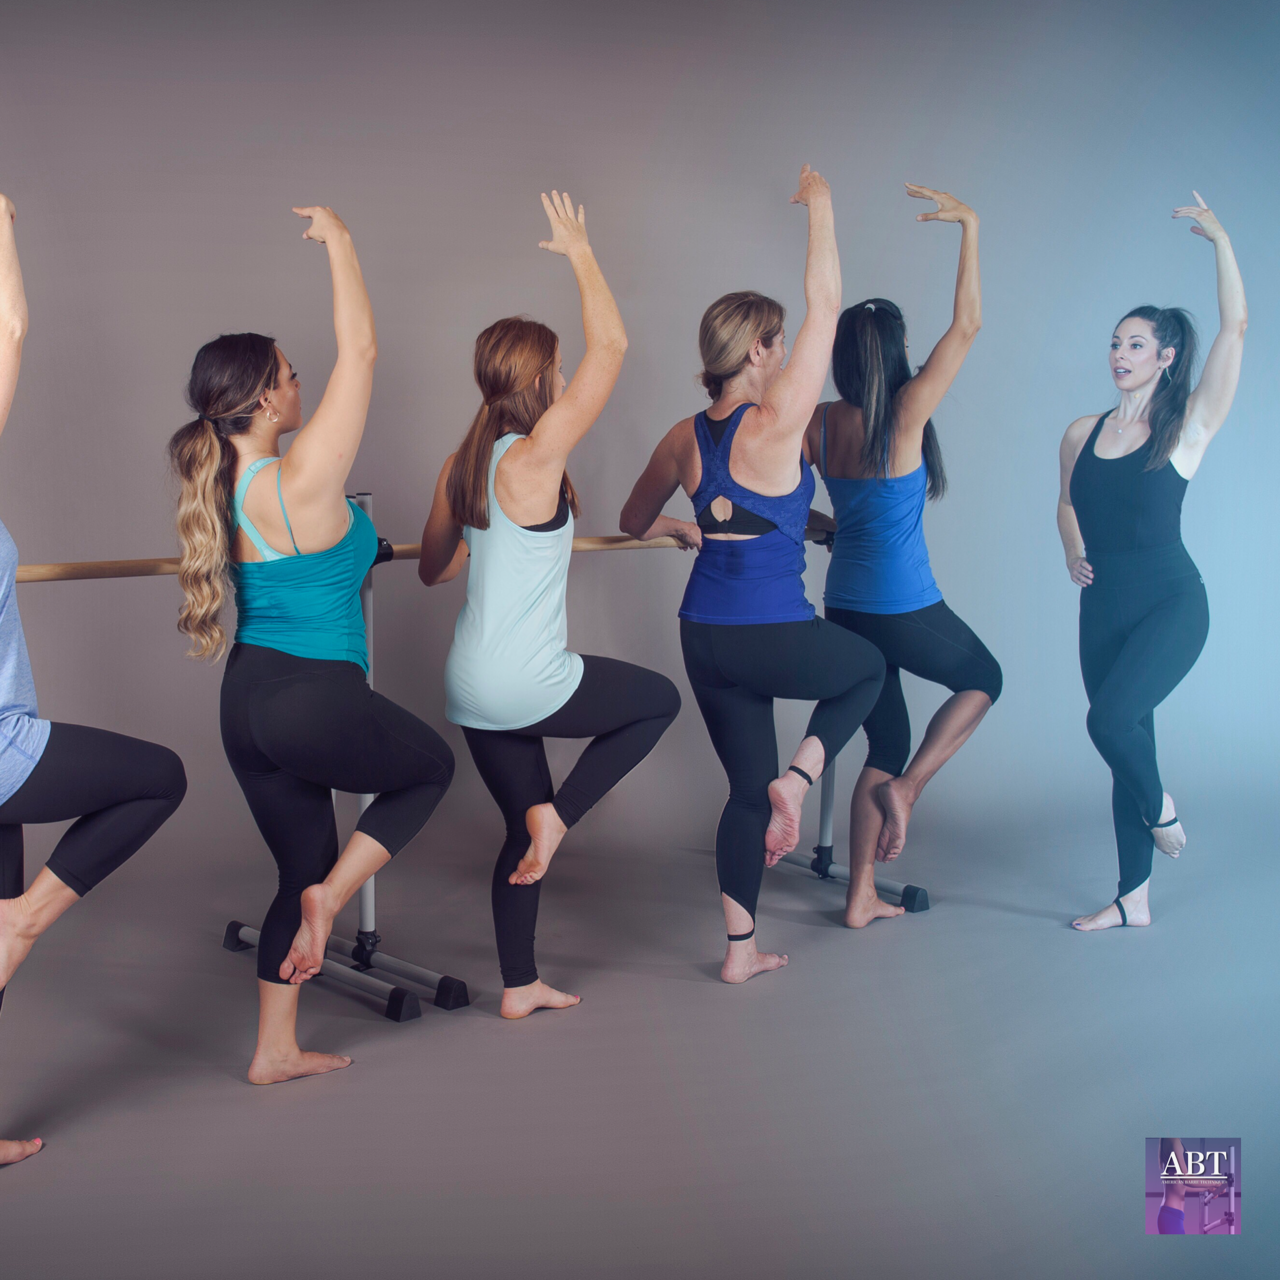 Get certified to teach barre today! Enroll in the American Barre Technique online barre certification.